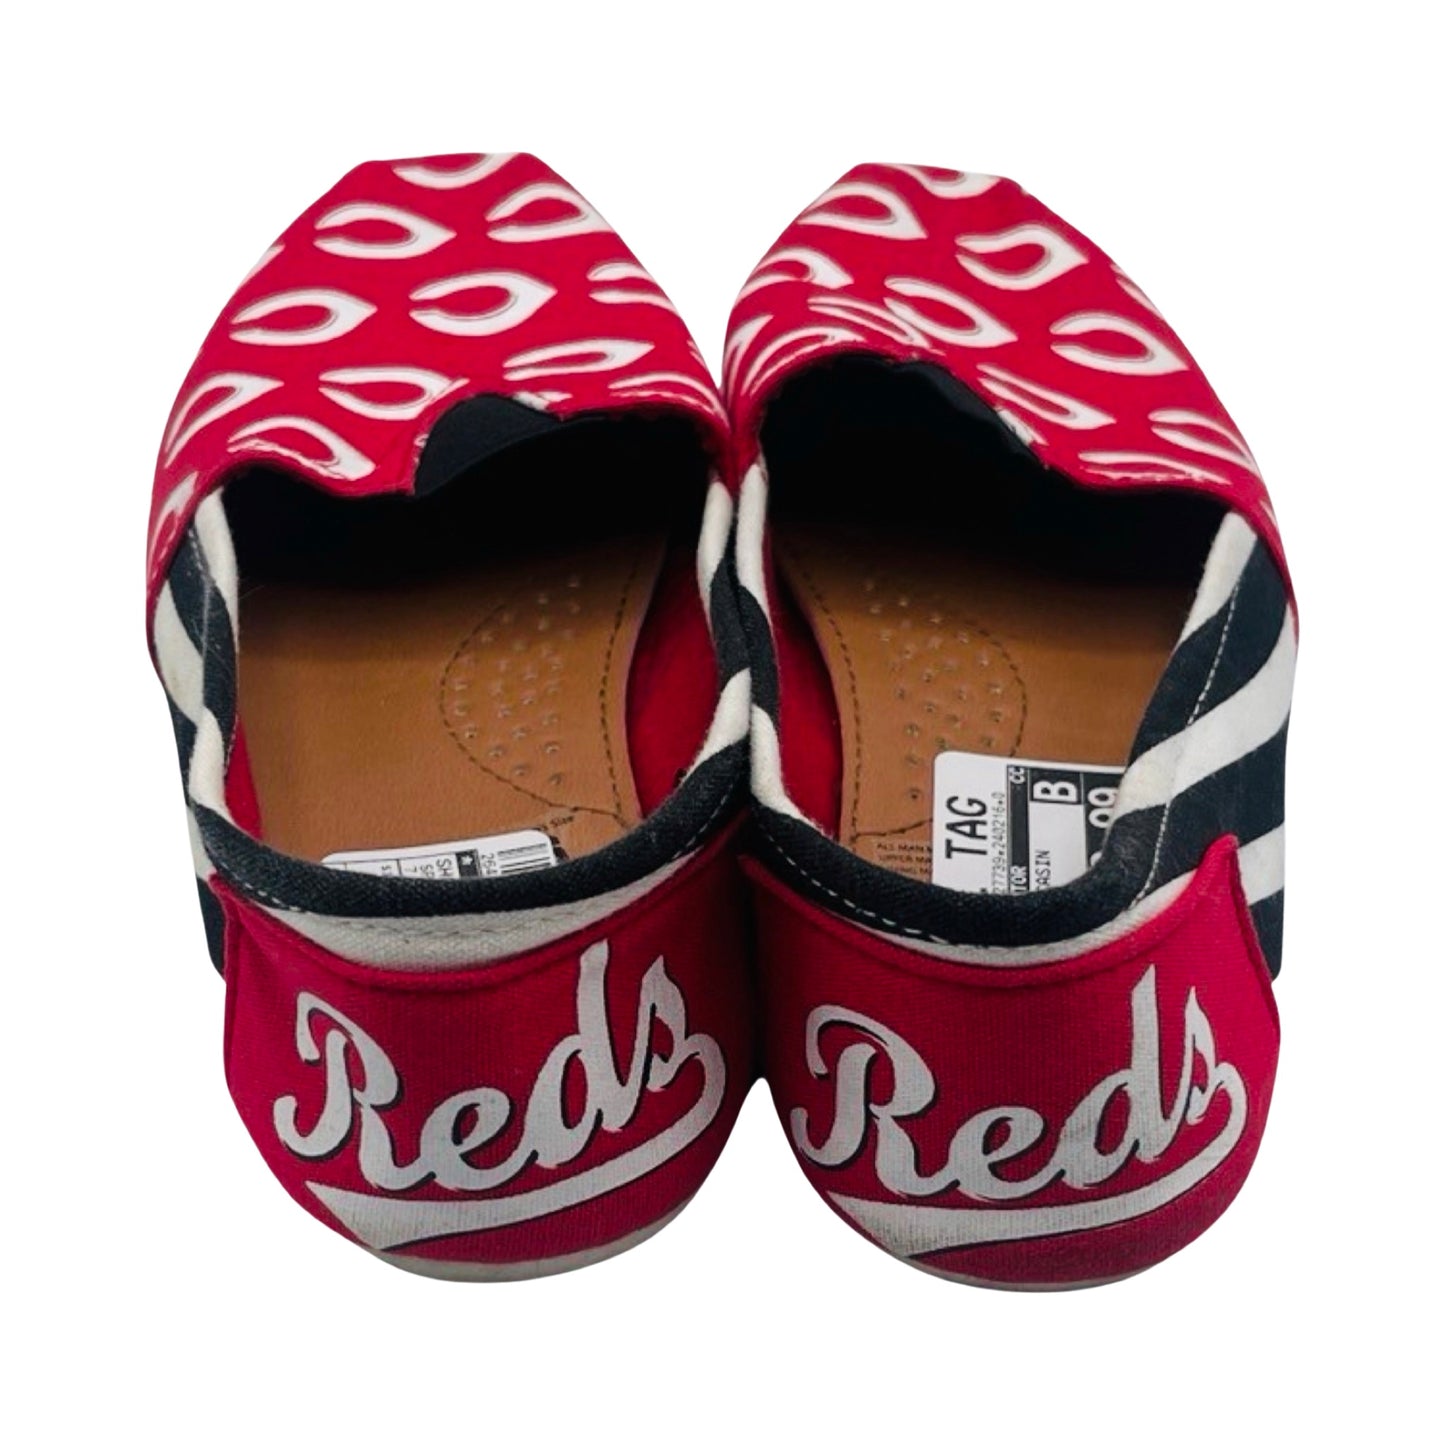 Cincinnati Reds Red with White C's Shoes Flats Moccasin By Clothes Mentor  Size: 7